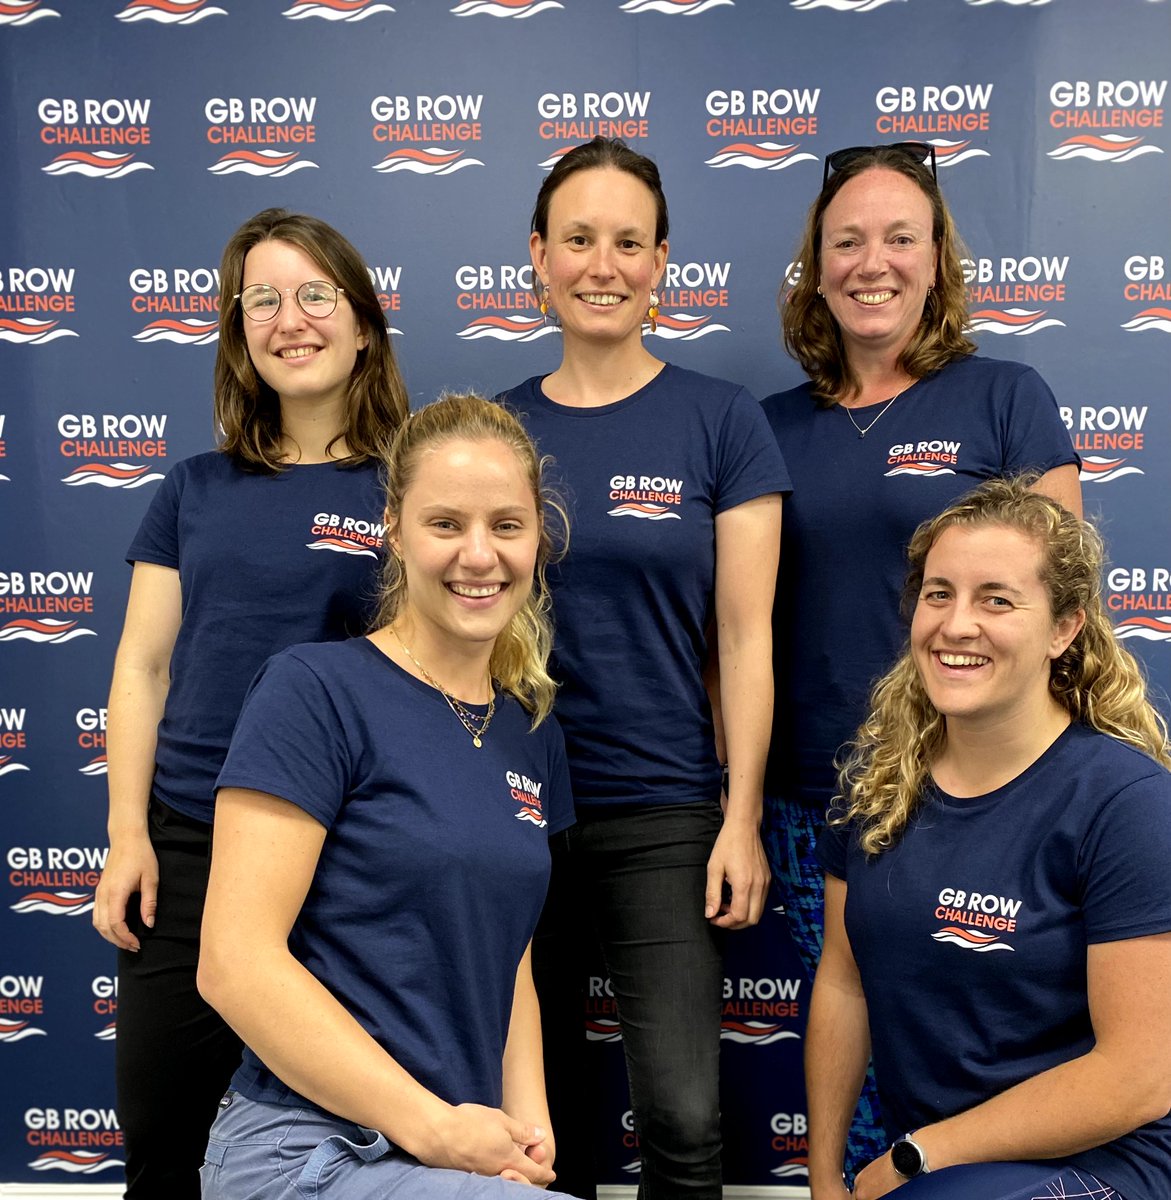 We are excited to share this pic of Sea Change, a team of female environmental professionals competing in GB Row Challenge 2024. They are determined to shine a global spotlight on the health of our coastal seas 🌊 #OceanRowing #RowWithAPurpose #WorldsToughestRow #SeaChange